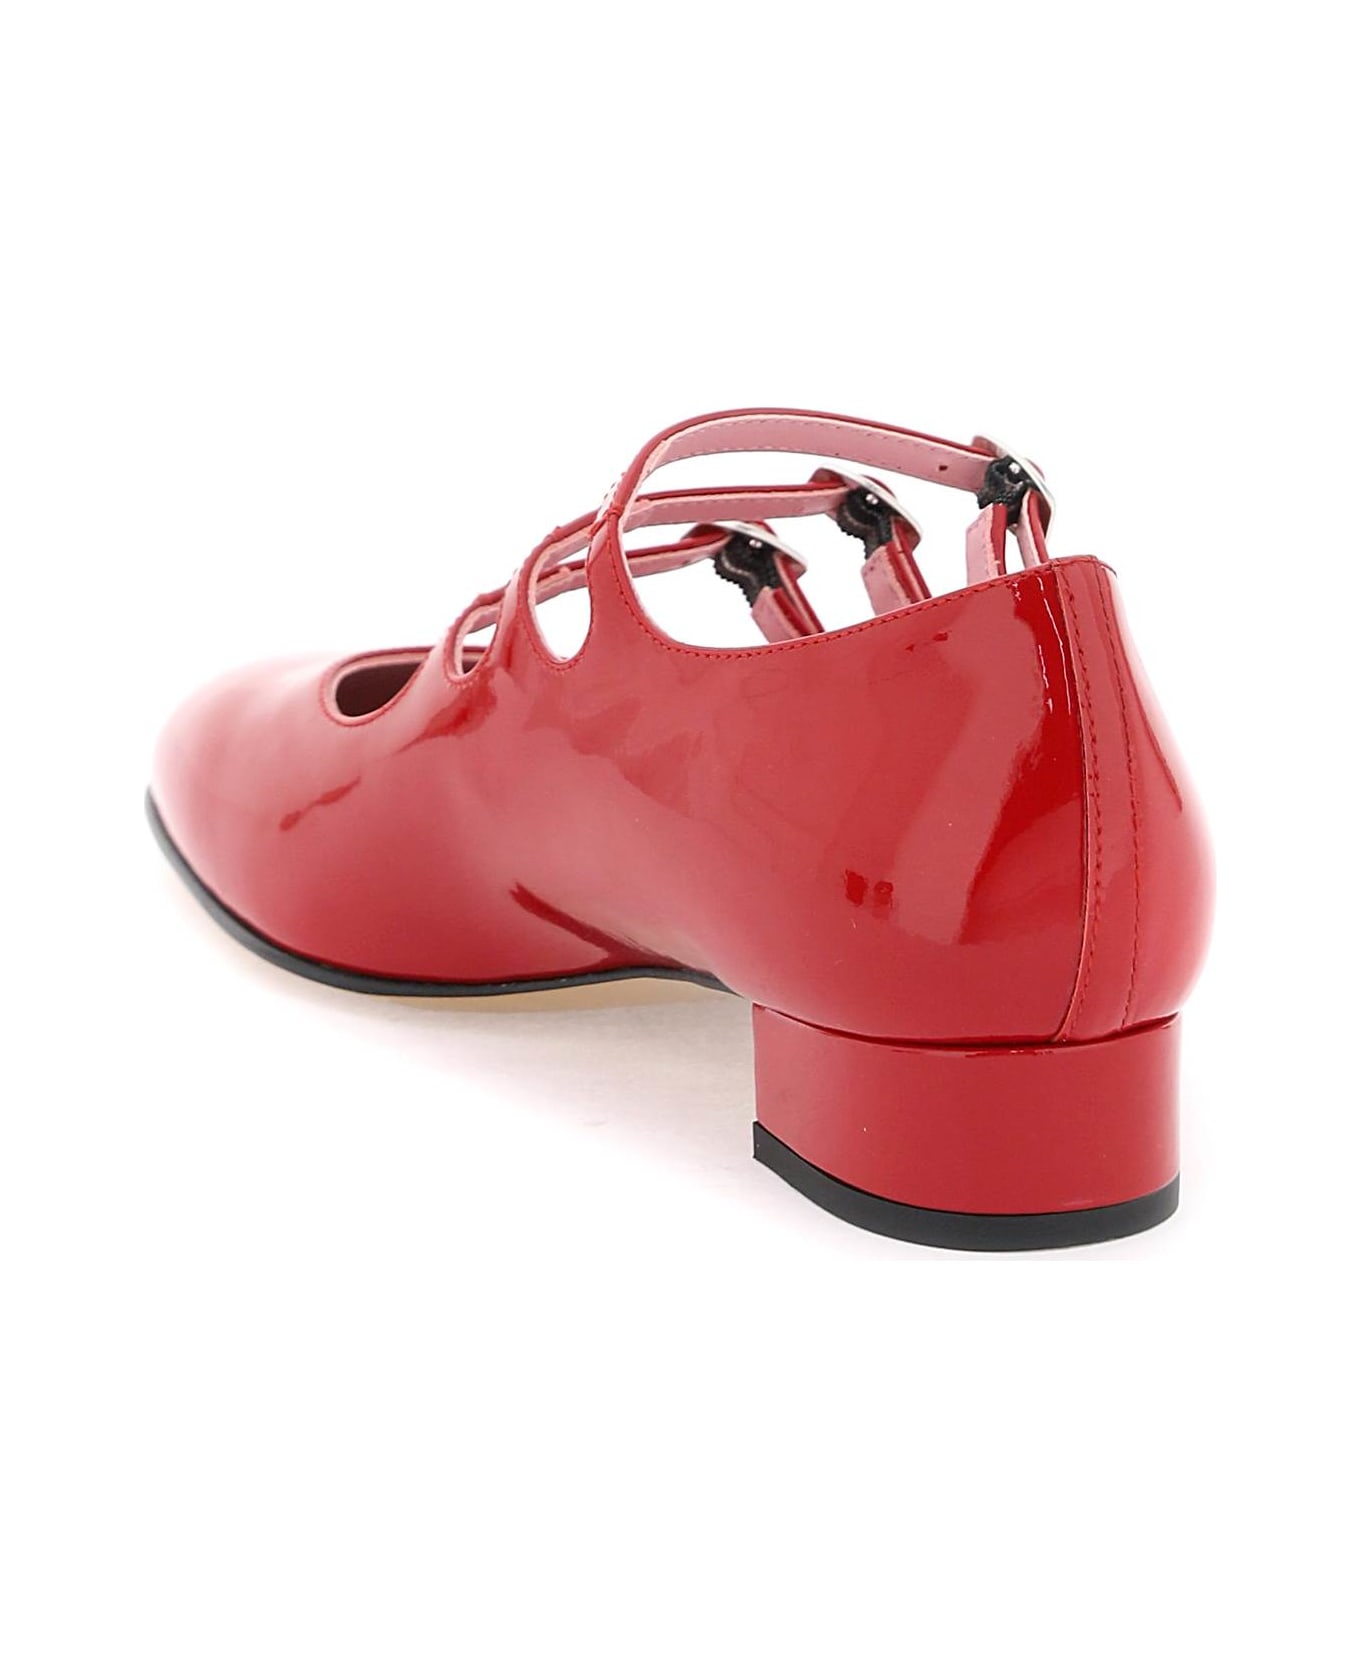 Carel Patent Leather Ariana Mary Jane - ROUGE (Red)